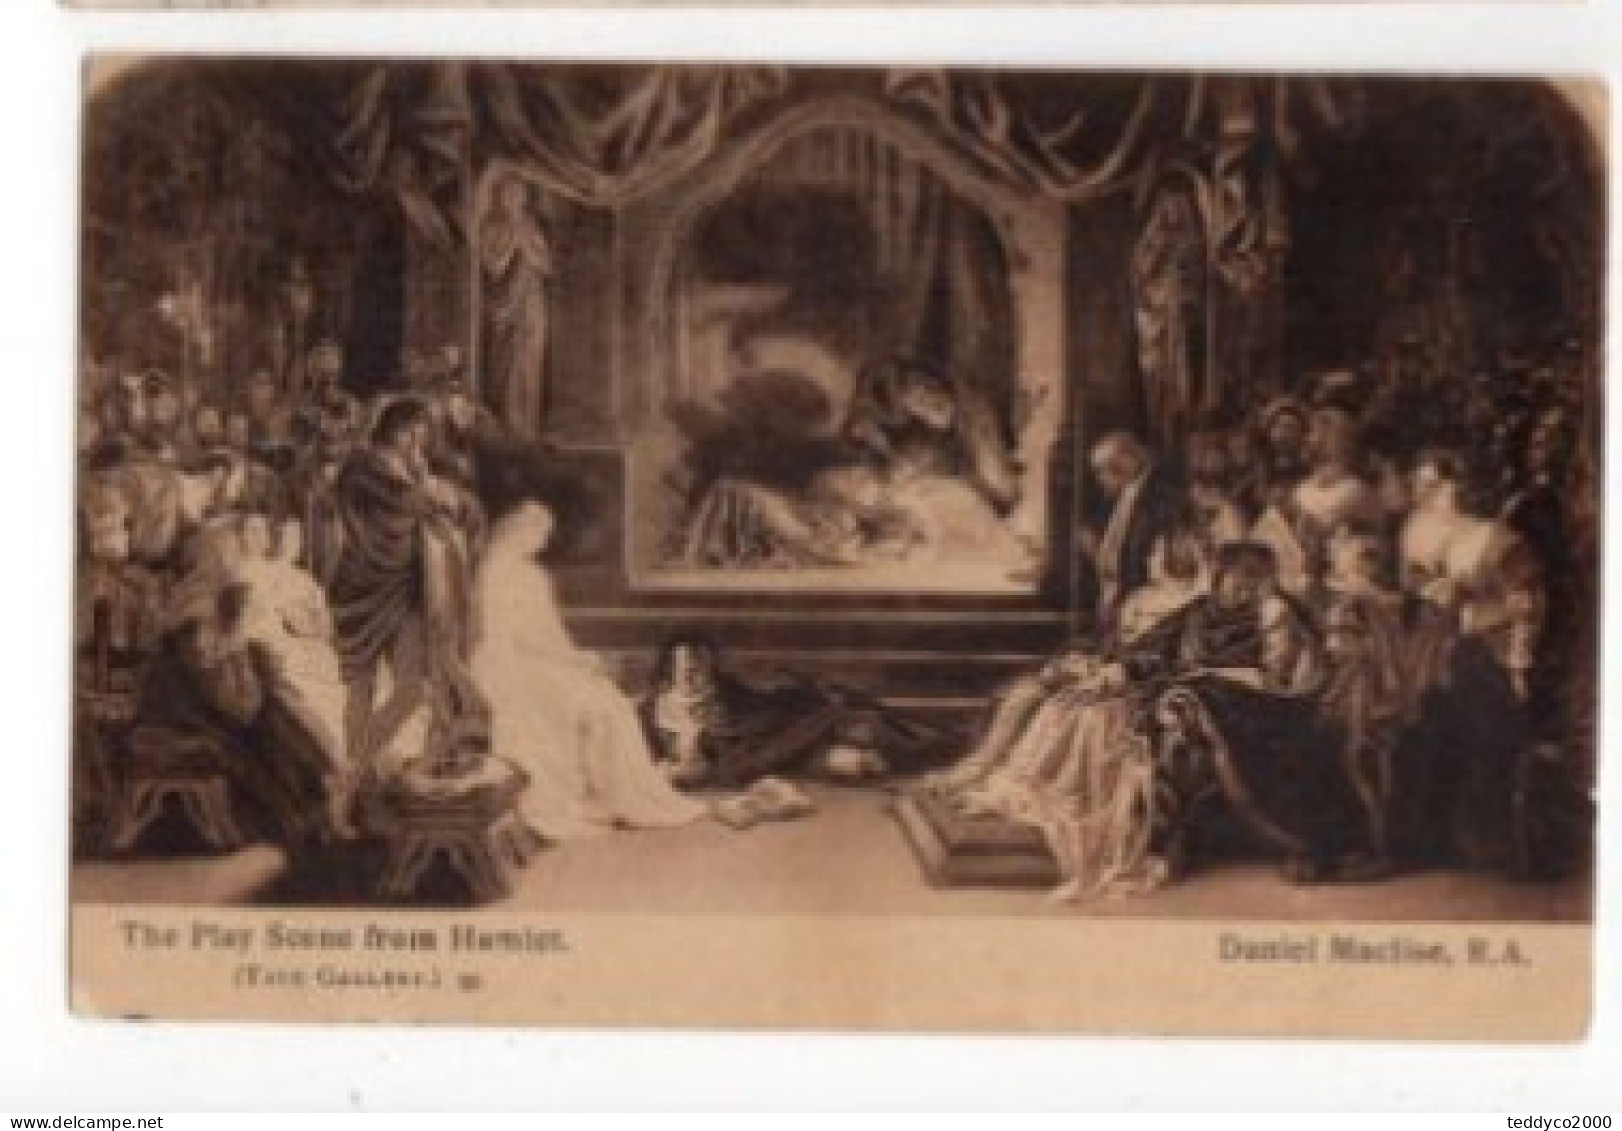 TATE GALLERY, Daniel Maclise The Play Scene From Hamlet 1911 - Museos